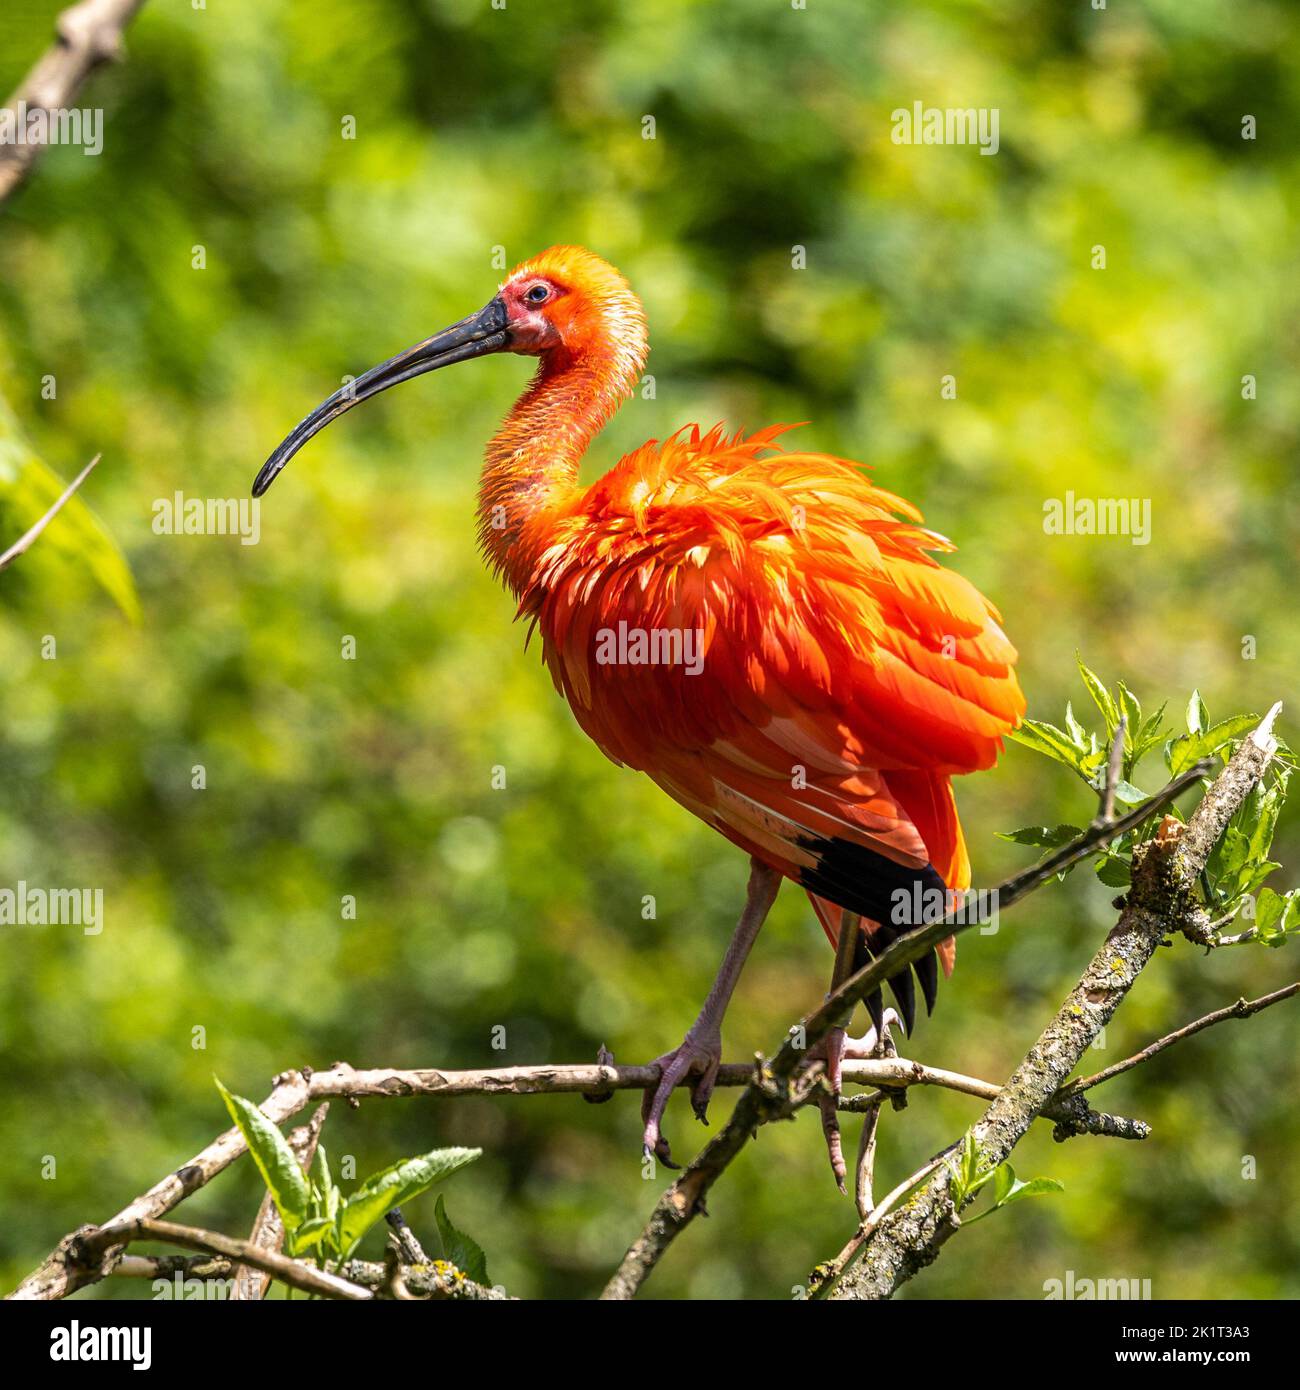 The Scarlet ibis, Eudocimus ruber is a species of ibis in the bird family Threskiornithidae. It inhabits tropical South America and islands of the Car Stock Photo